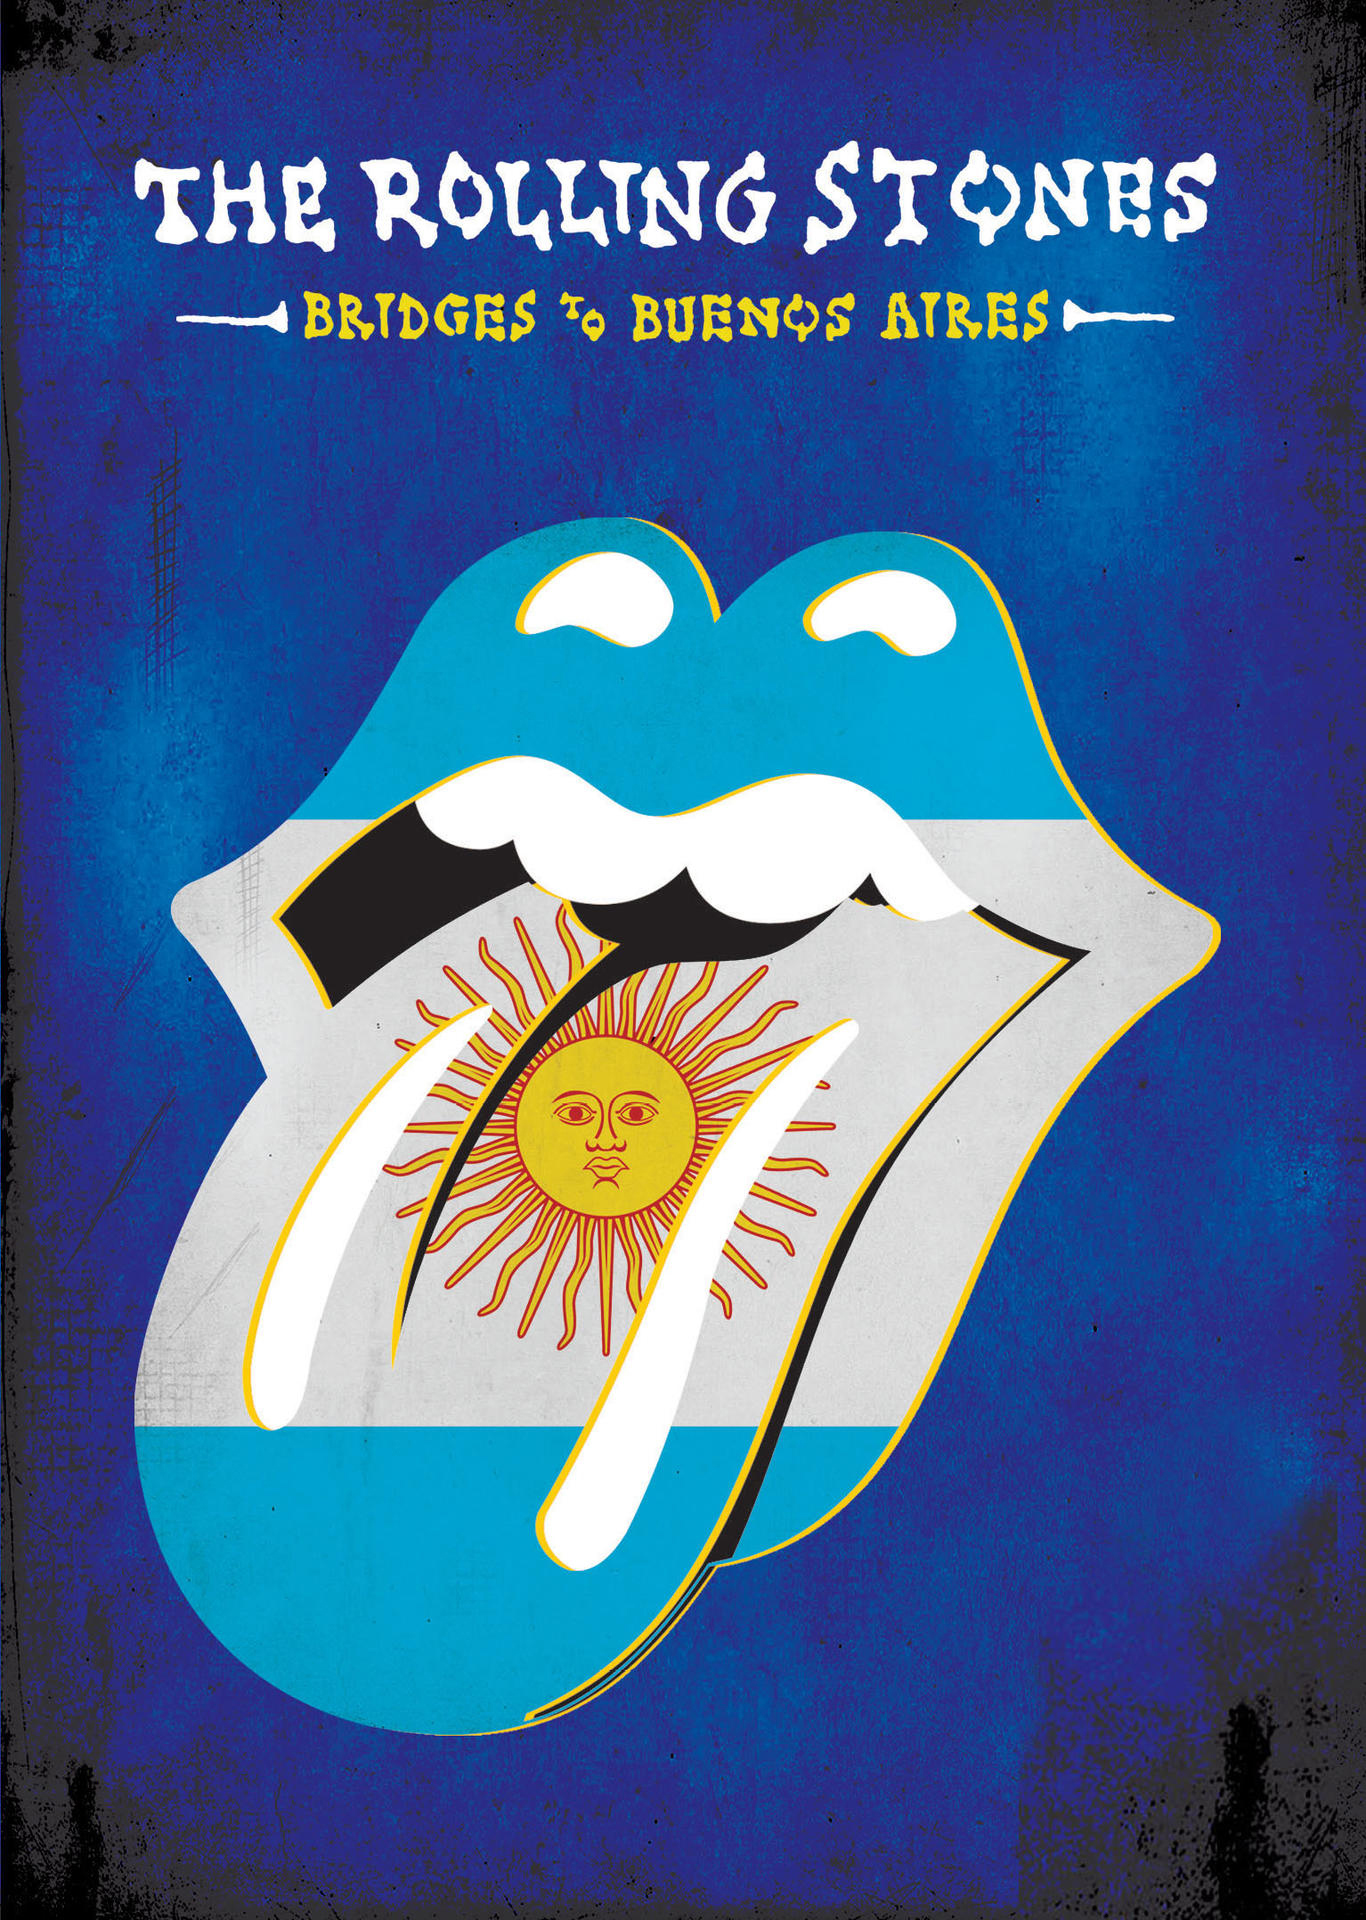 (DVD) To - - Aires Bridges Stones Buenos The Rolling